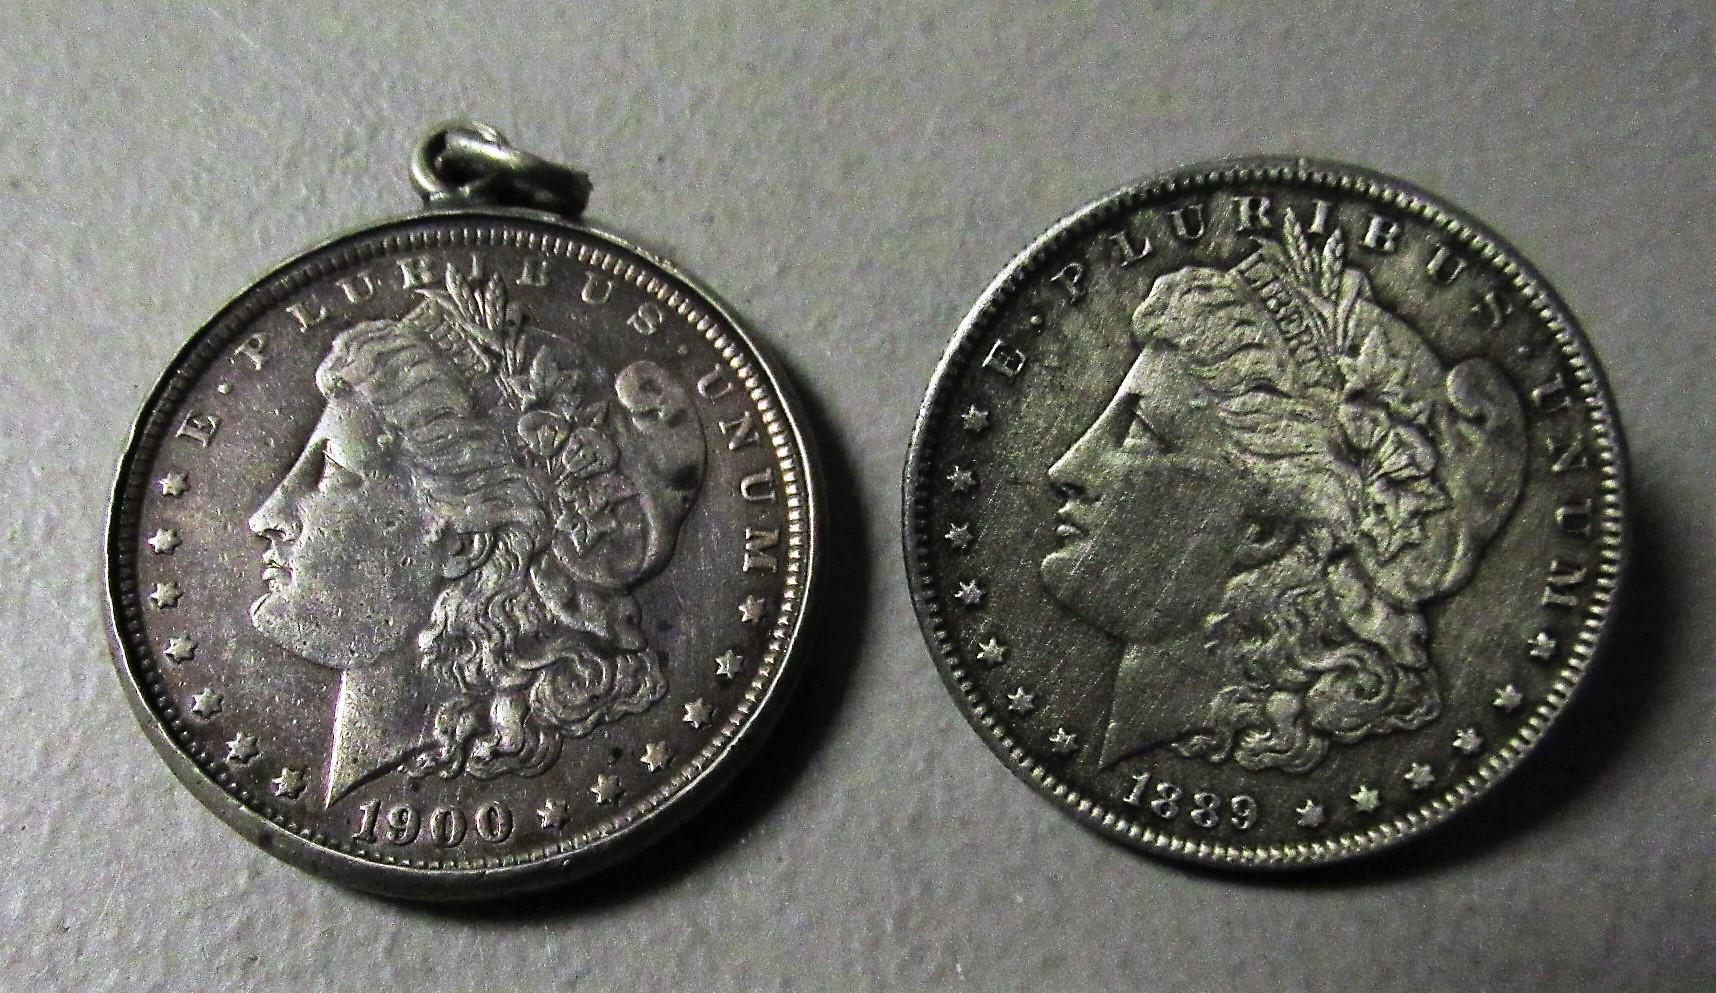 1889,1900 Morgan Dollars used for Jewelry